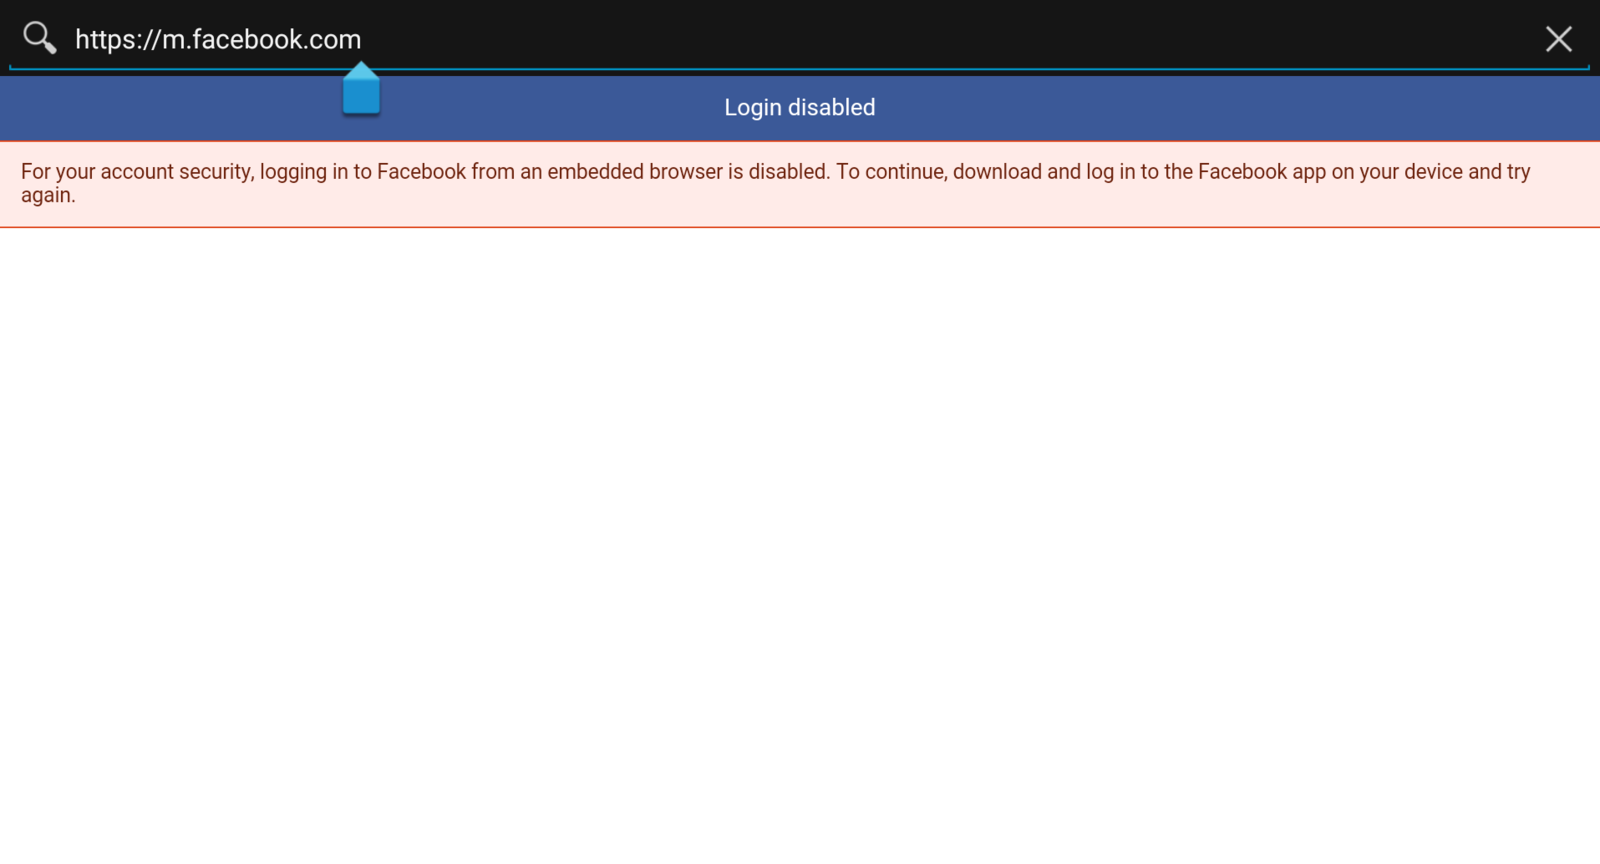 Fix the Error Logging Into Facebook From an Embedded Browser is